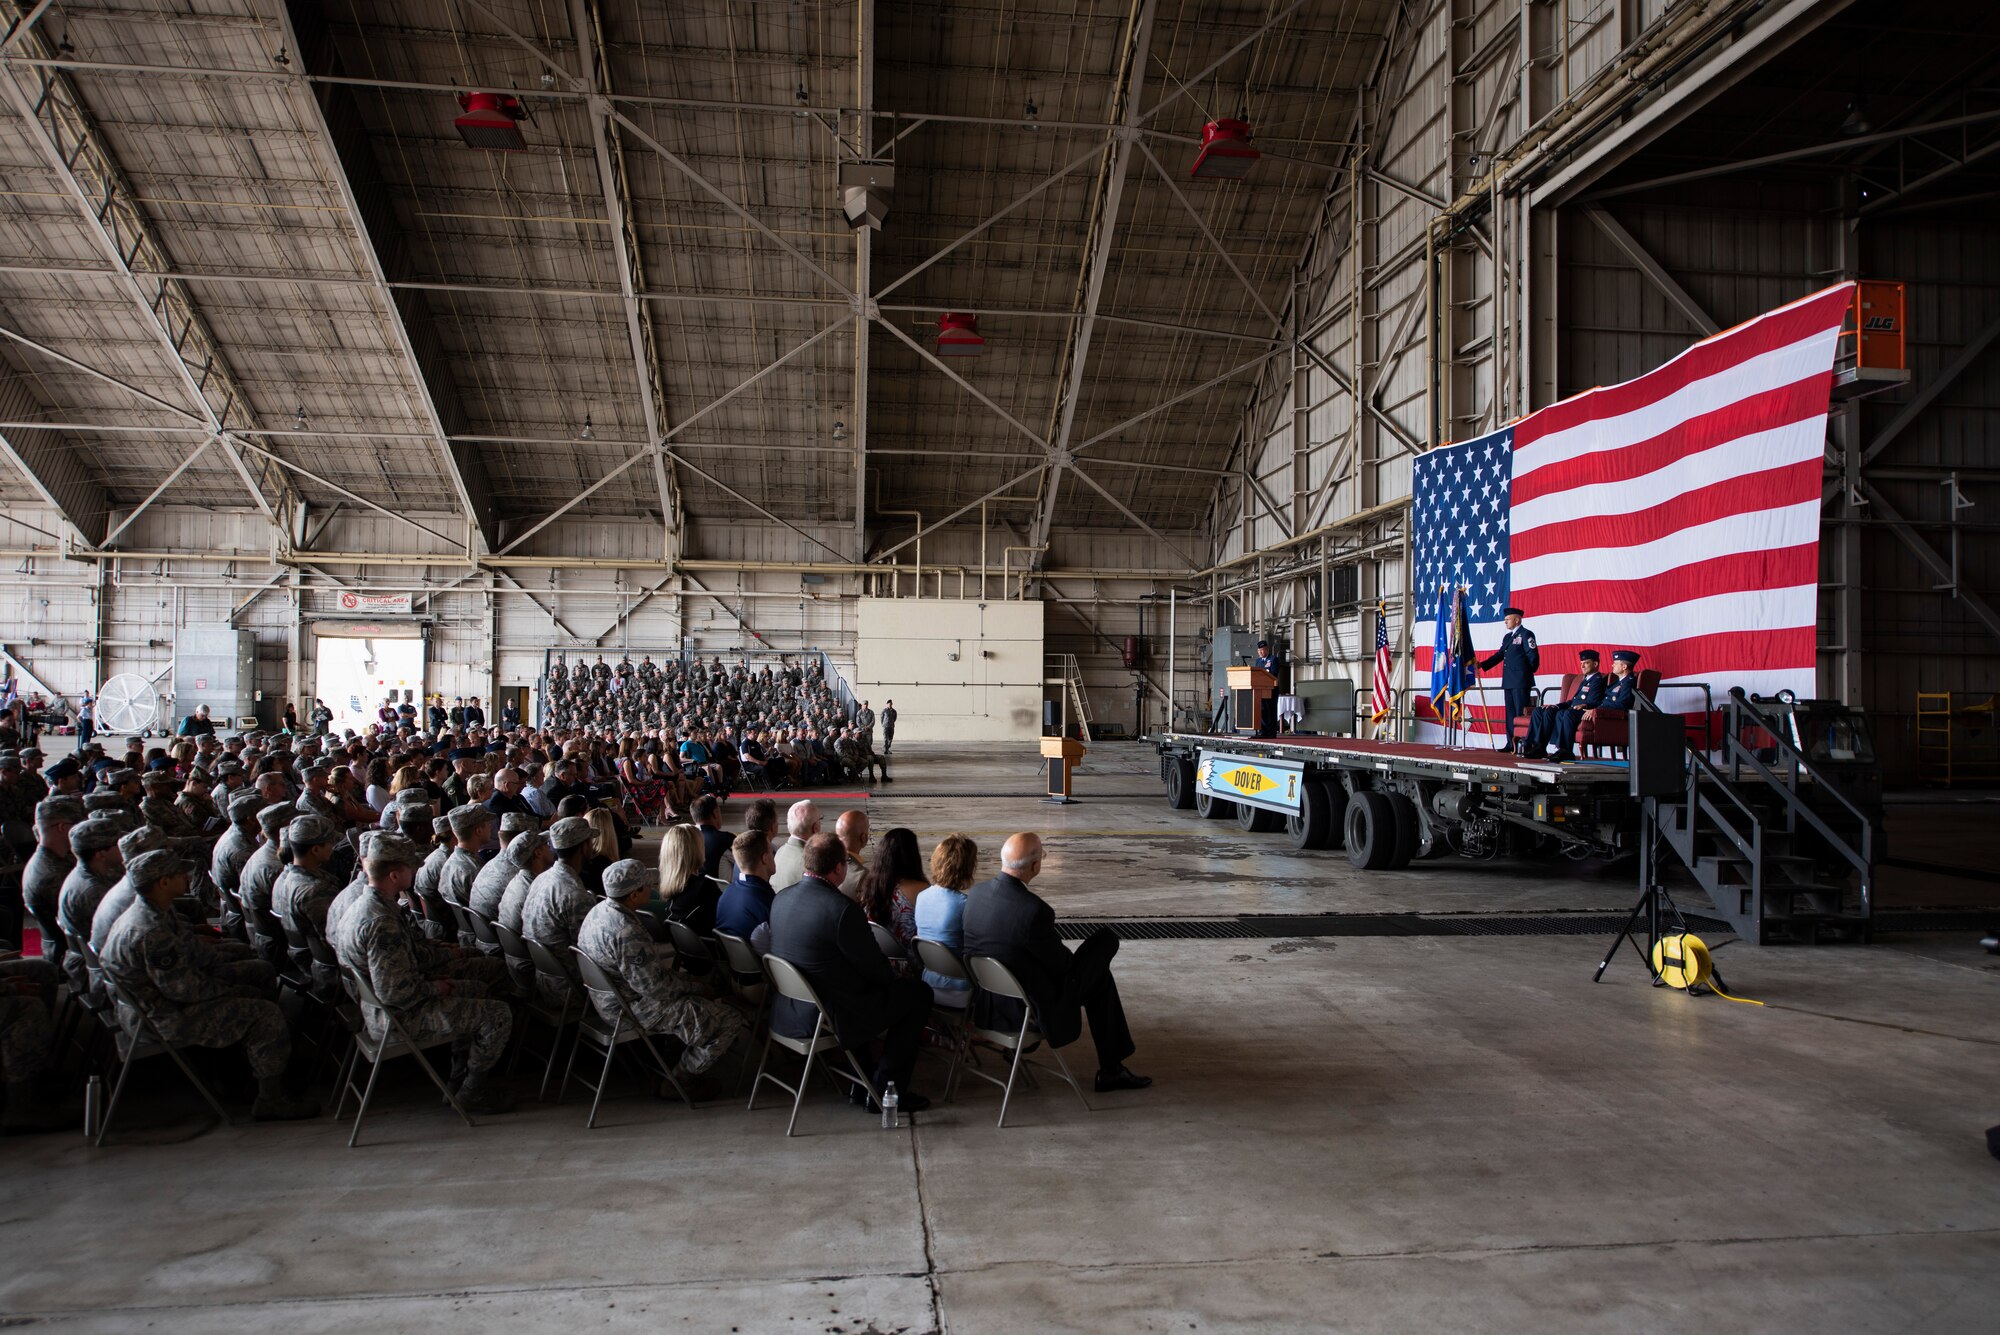 Members of Team Dover attend the 436th Airlift Wing Change of Command Ceremony May 30, 2018, at Dover Air Force Base, Del. Col. Ethan Griffin relinquished command of the 436th AW to Col. Joel Safranek in the ceremony, which was officiated by Lt. Gen. GI Tuck, 18th Air Force commander. (U.S. Air Force photo by Mauricio Campino)